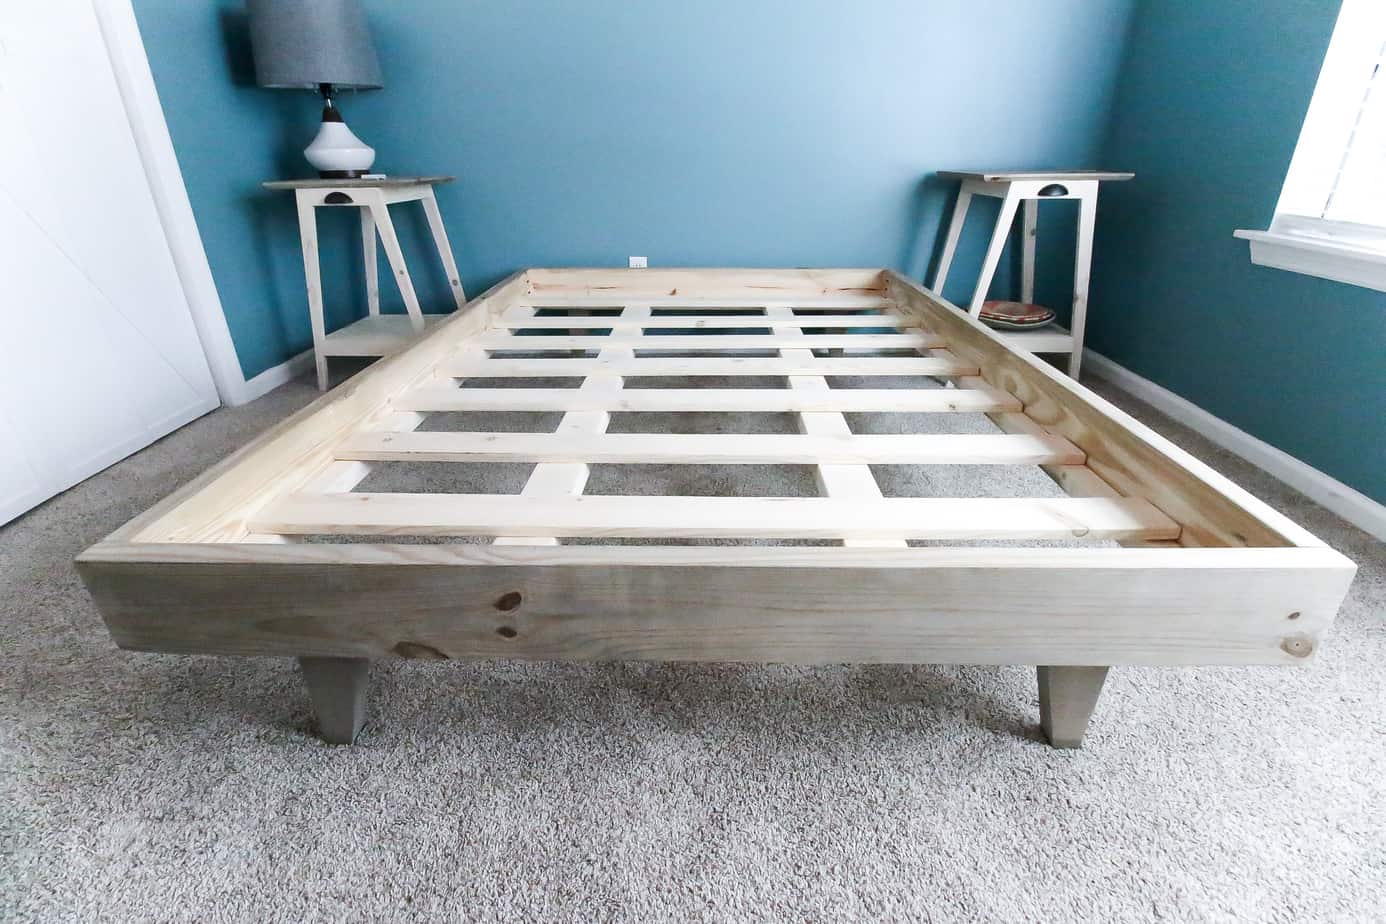 How To Build A Platform Bed For 50, Simple King Size Bed Frame Diy